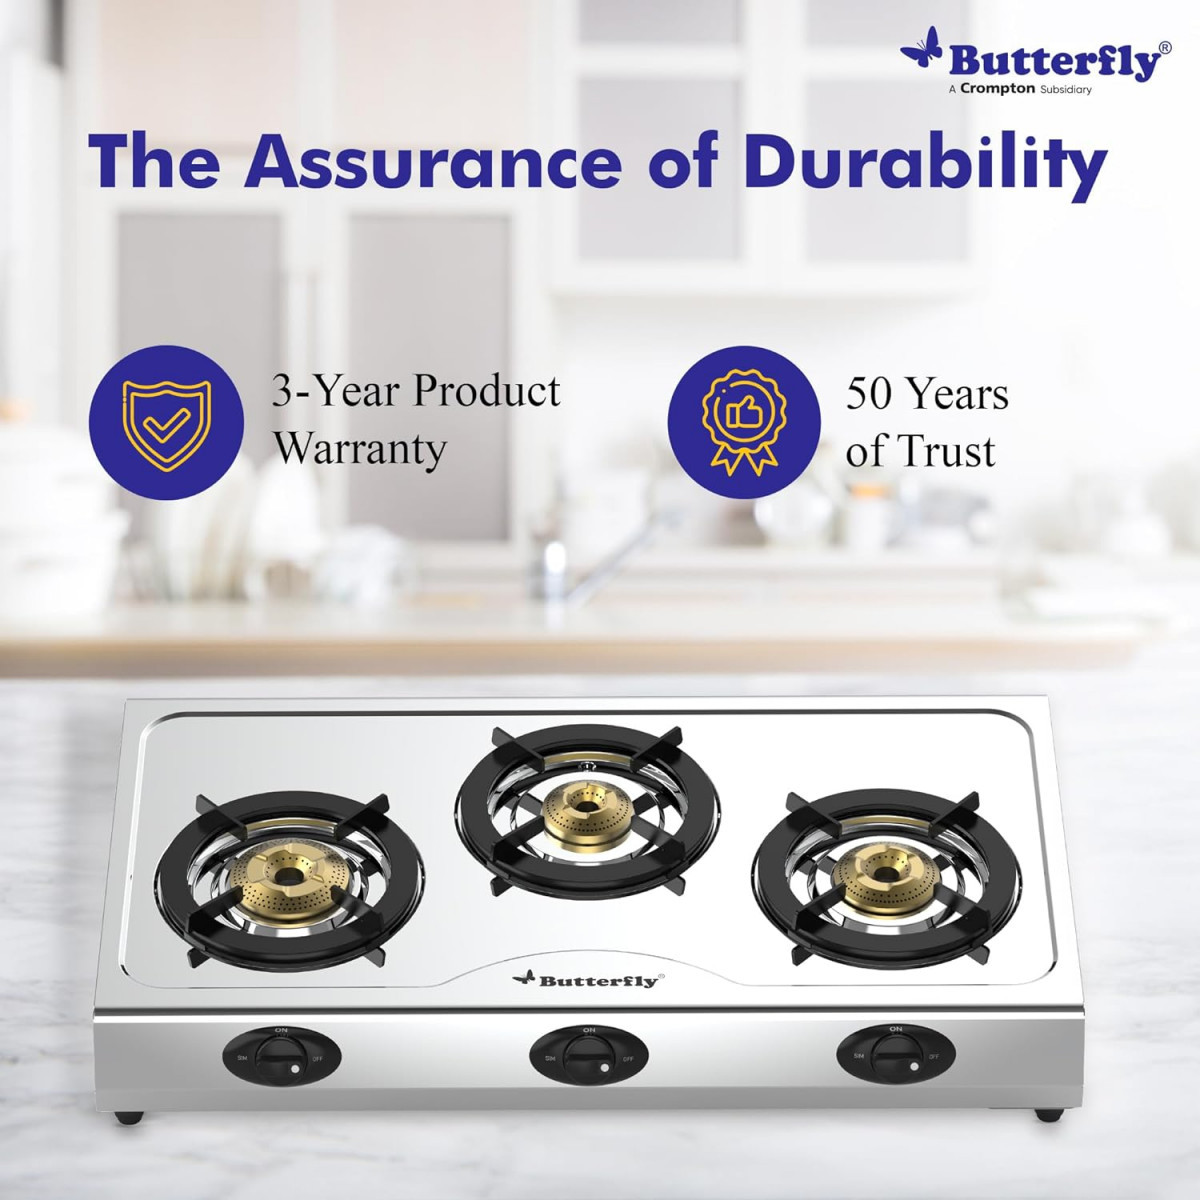 Butterfly Bolt 3B Stainless Steel Lpg Open Gas Stove Silver